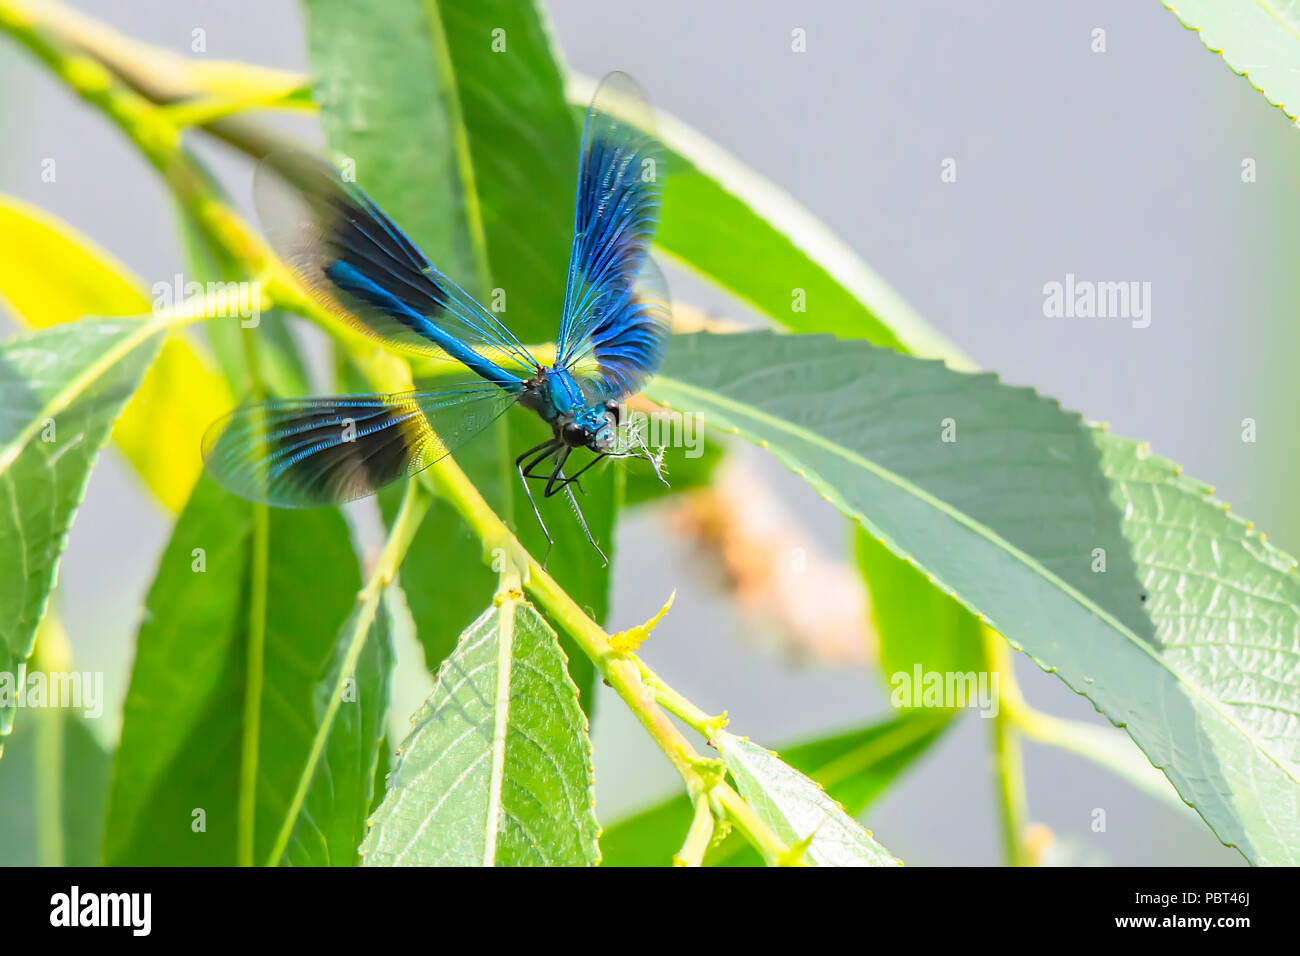 Banded demoiselle, Calopteryx splendens male in flight, attempting to land on plant leaf.Popular, colourful insect widespread on british river banks. Stock Photo